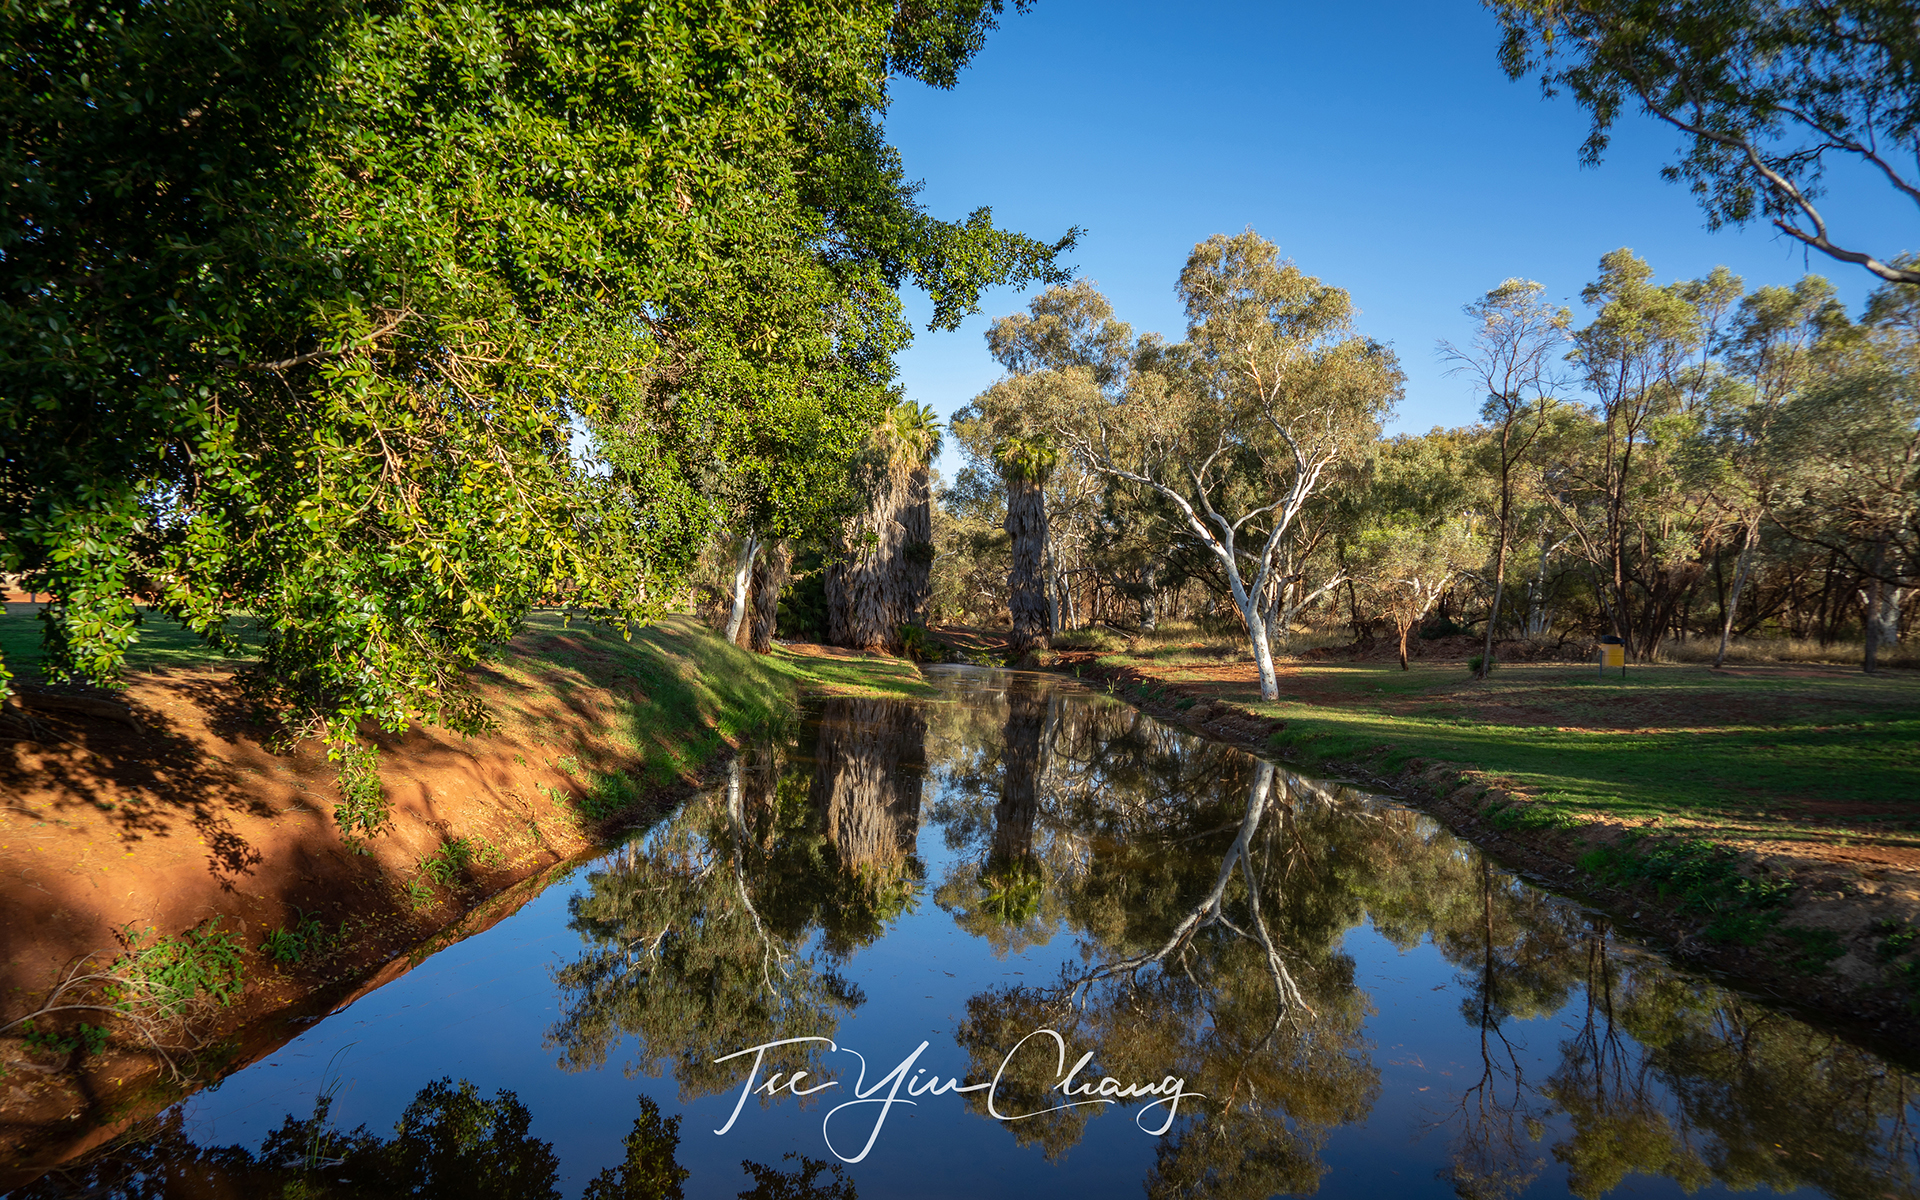 Kings Lake is a beautiful parkland in a natural bush setting located just outside of Tom Price